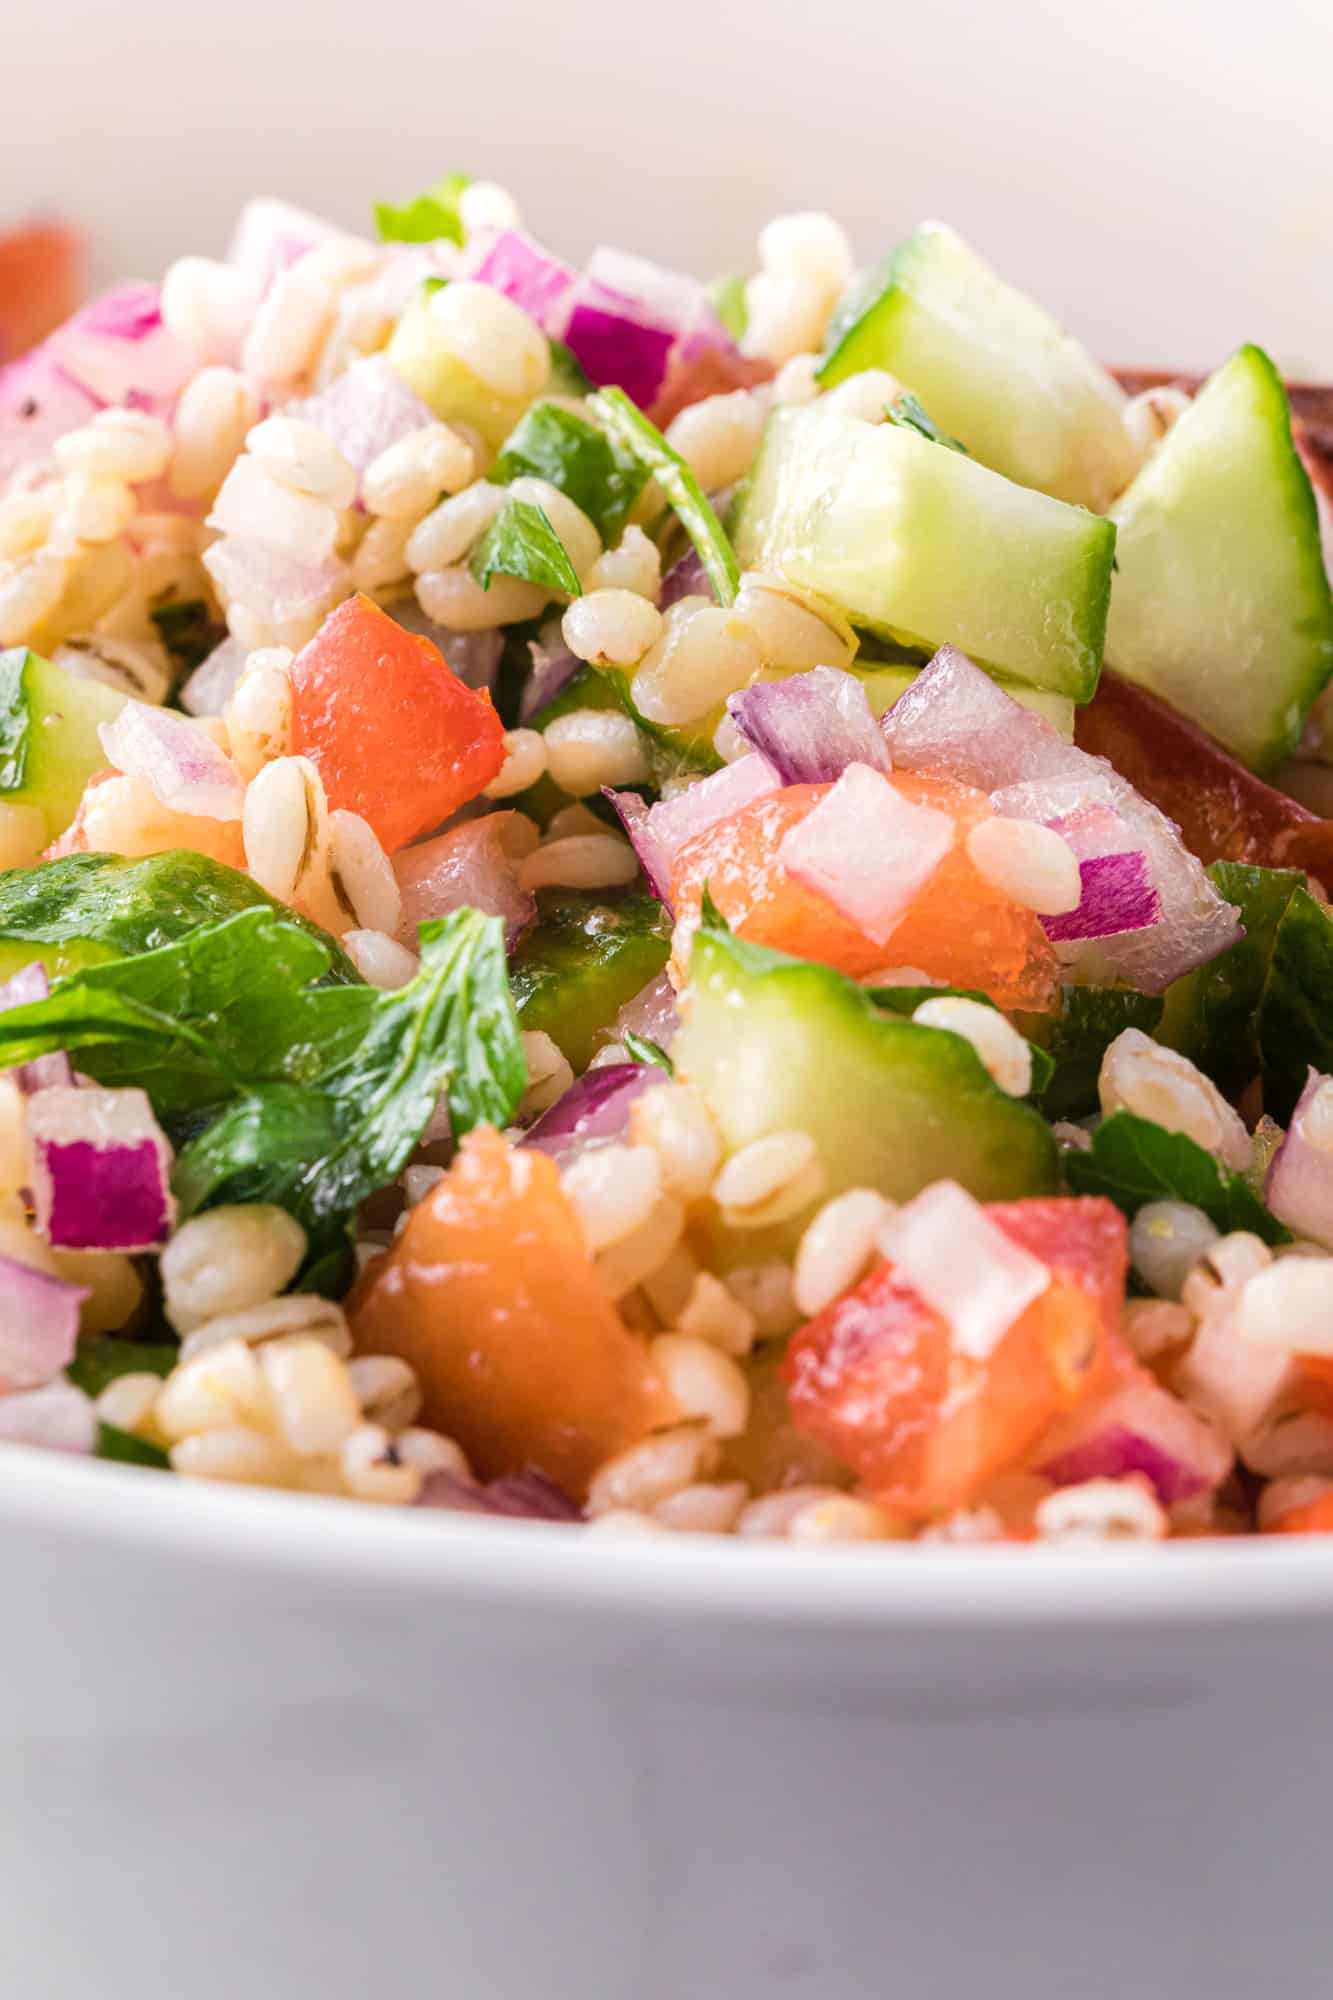 Close up image of barley salad with cucumber, tomato, onion, herbs.